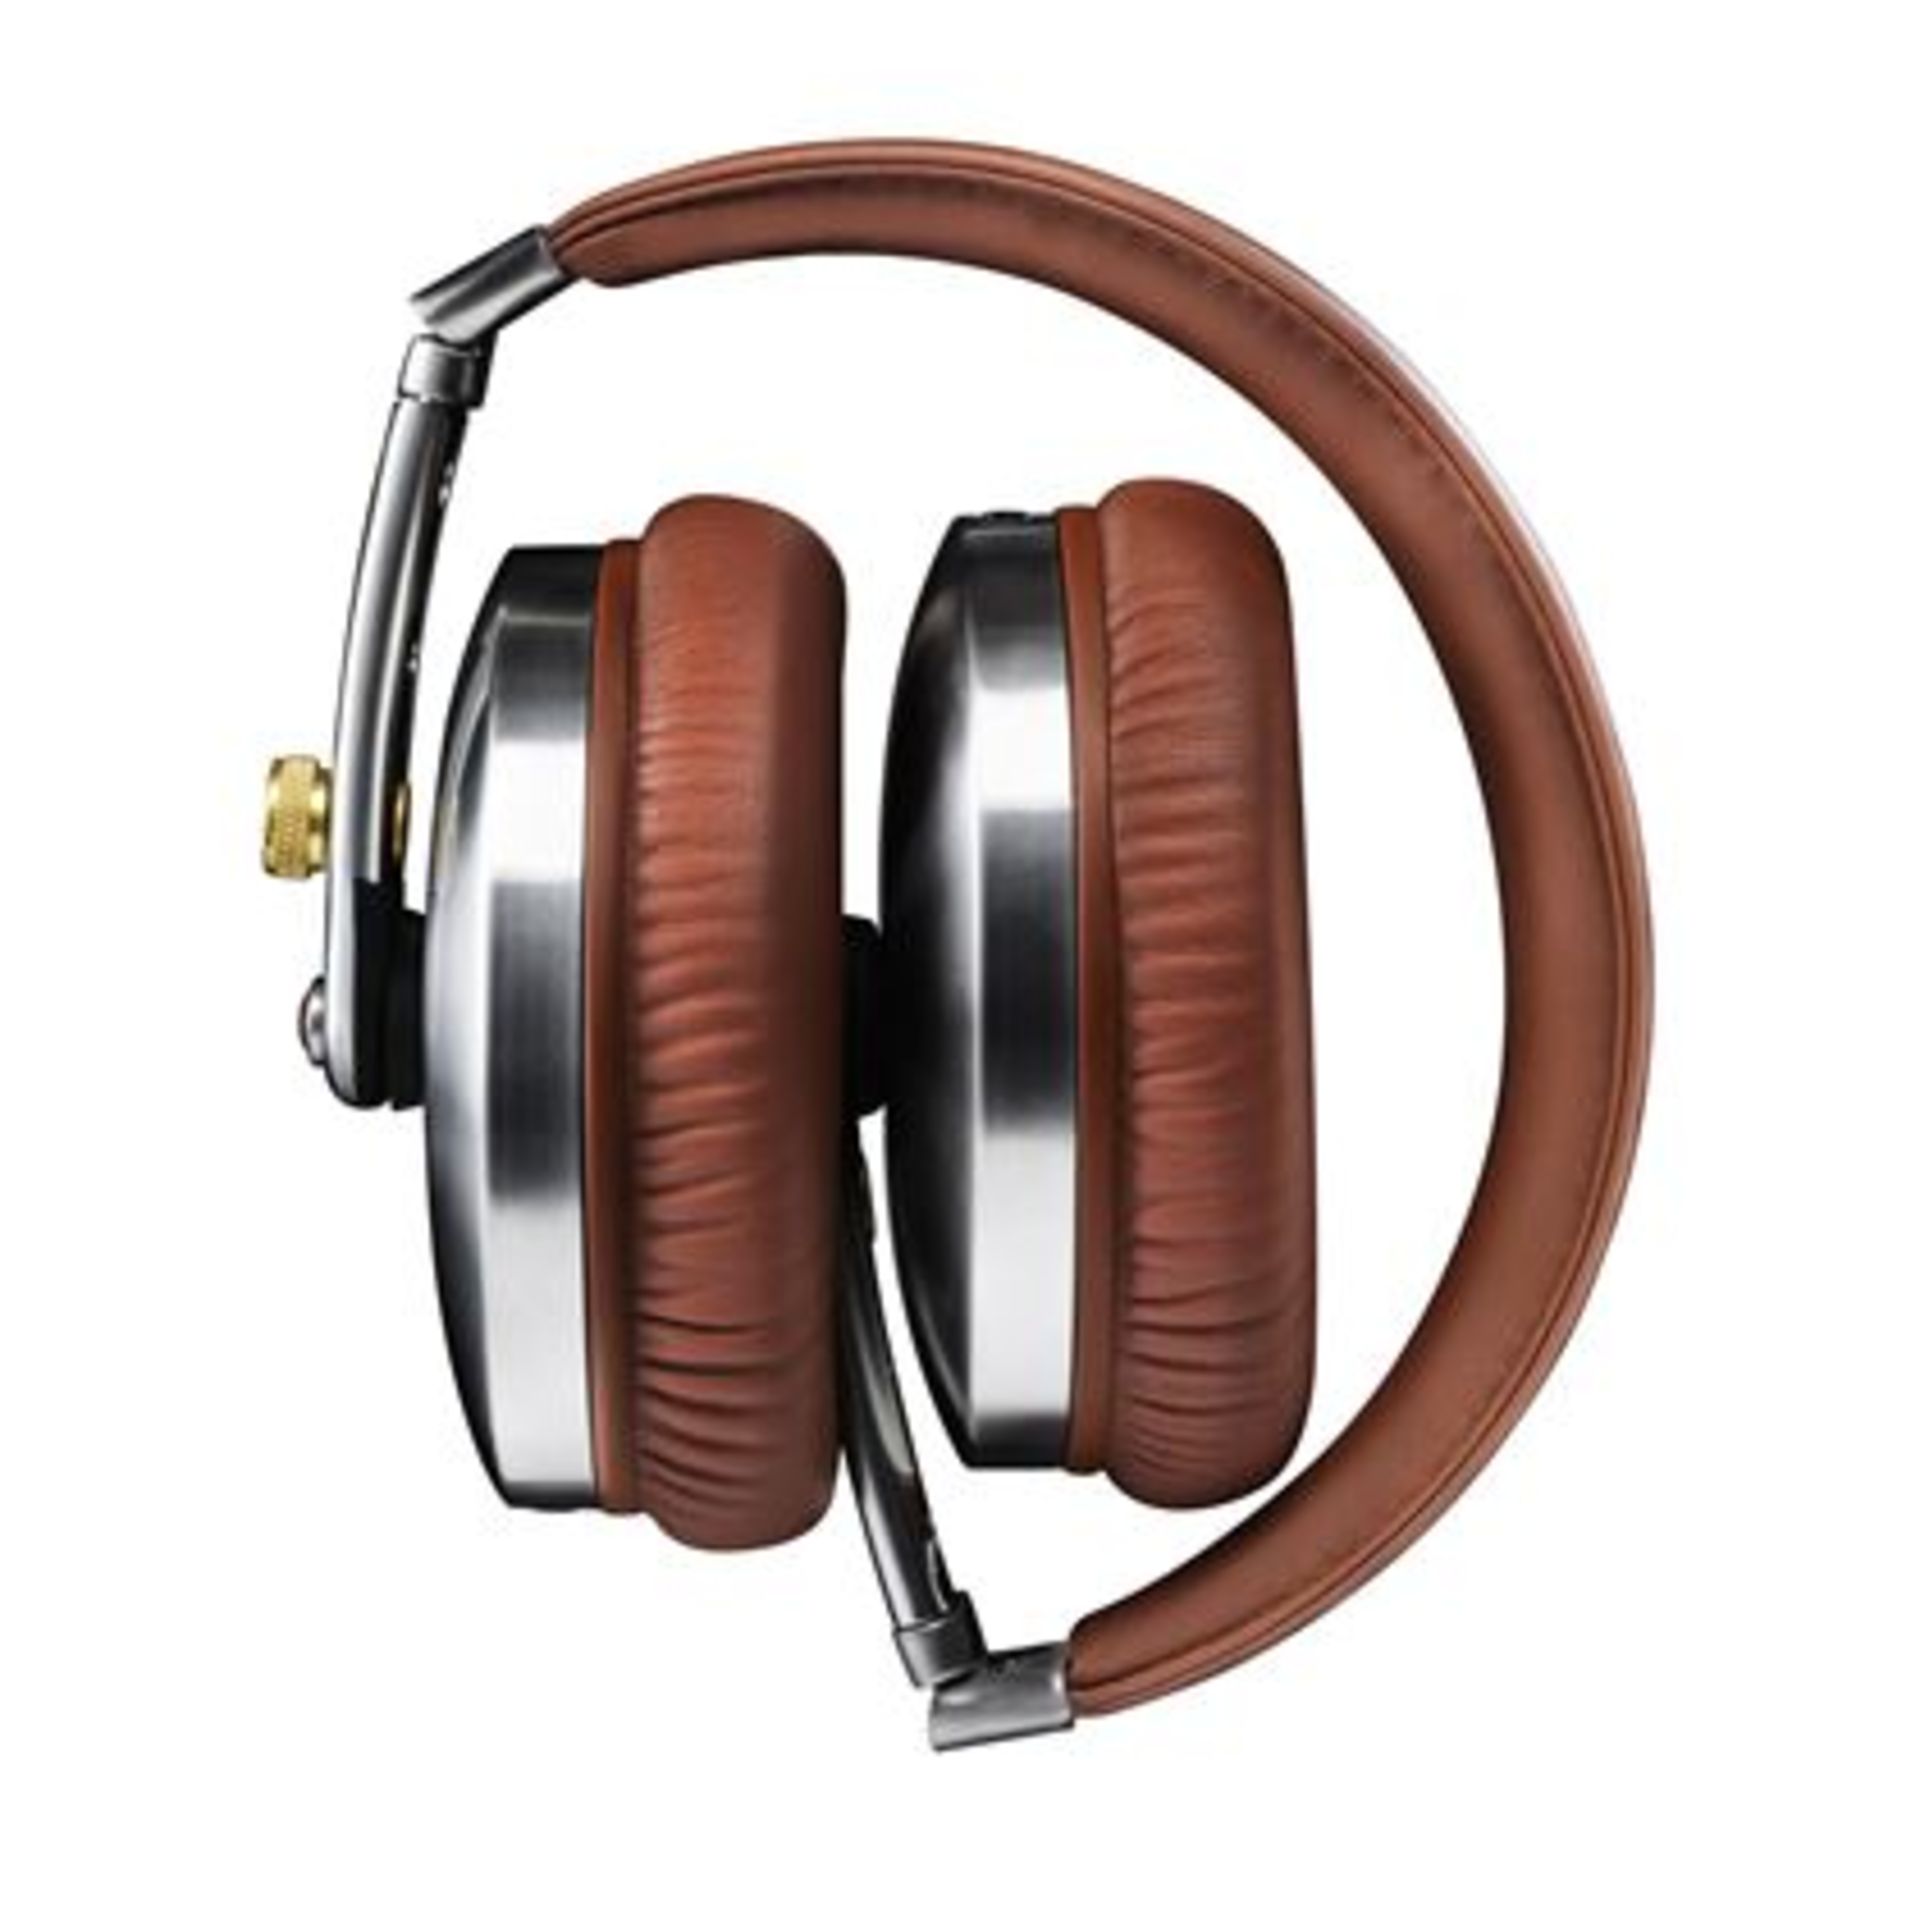 V *TRADE QTY* Brand New Ted Baker Rockall High Performance Folding Over Ear Headphones Brown/ - Image 2 of 2